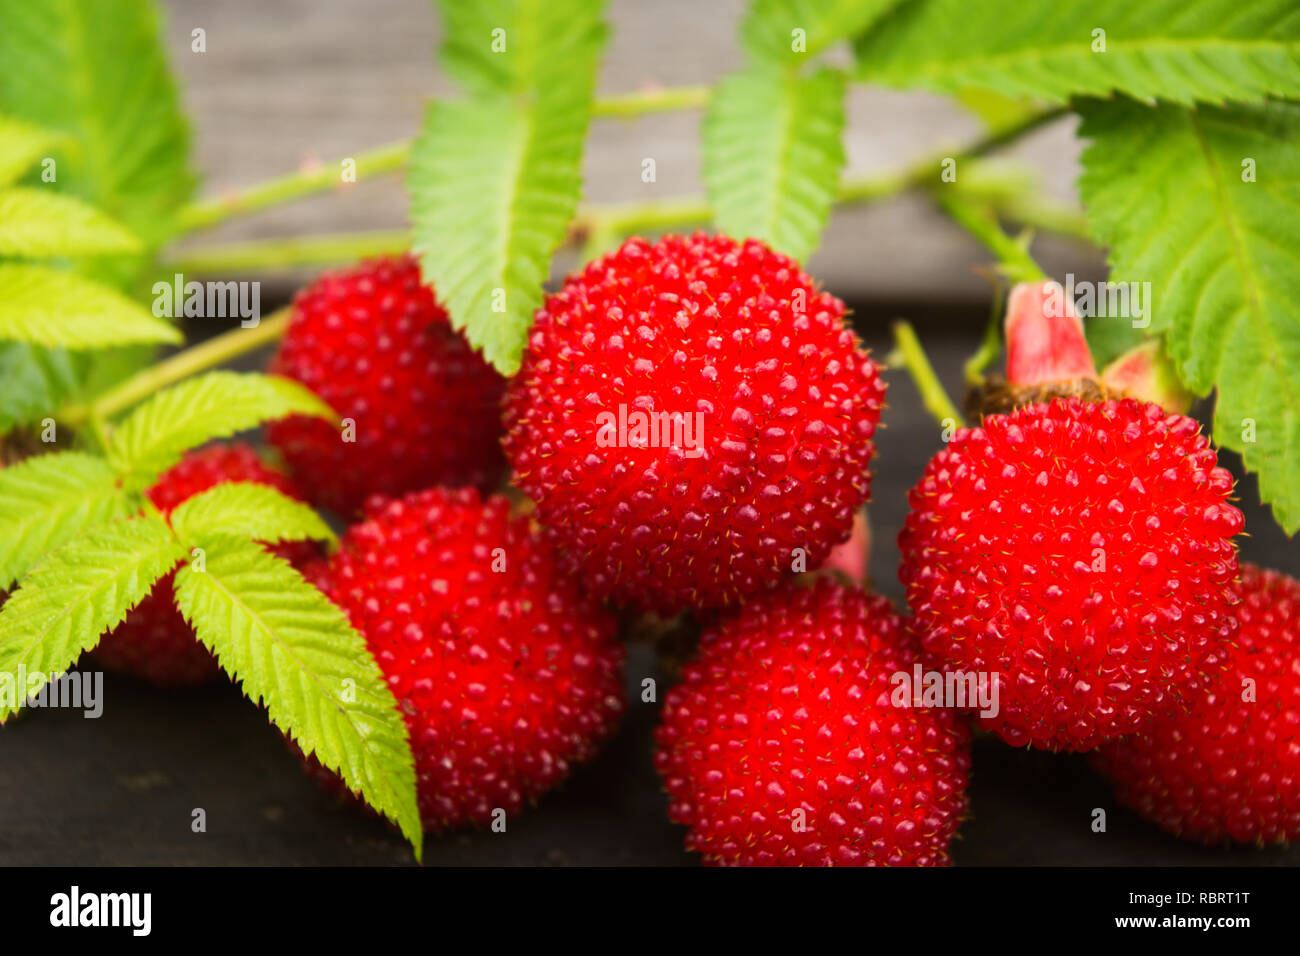 Red Tibetan raspberries for immunity with pectin for digestion, closeup view Stock Photo